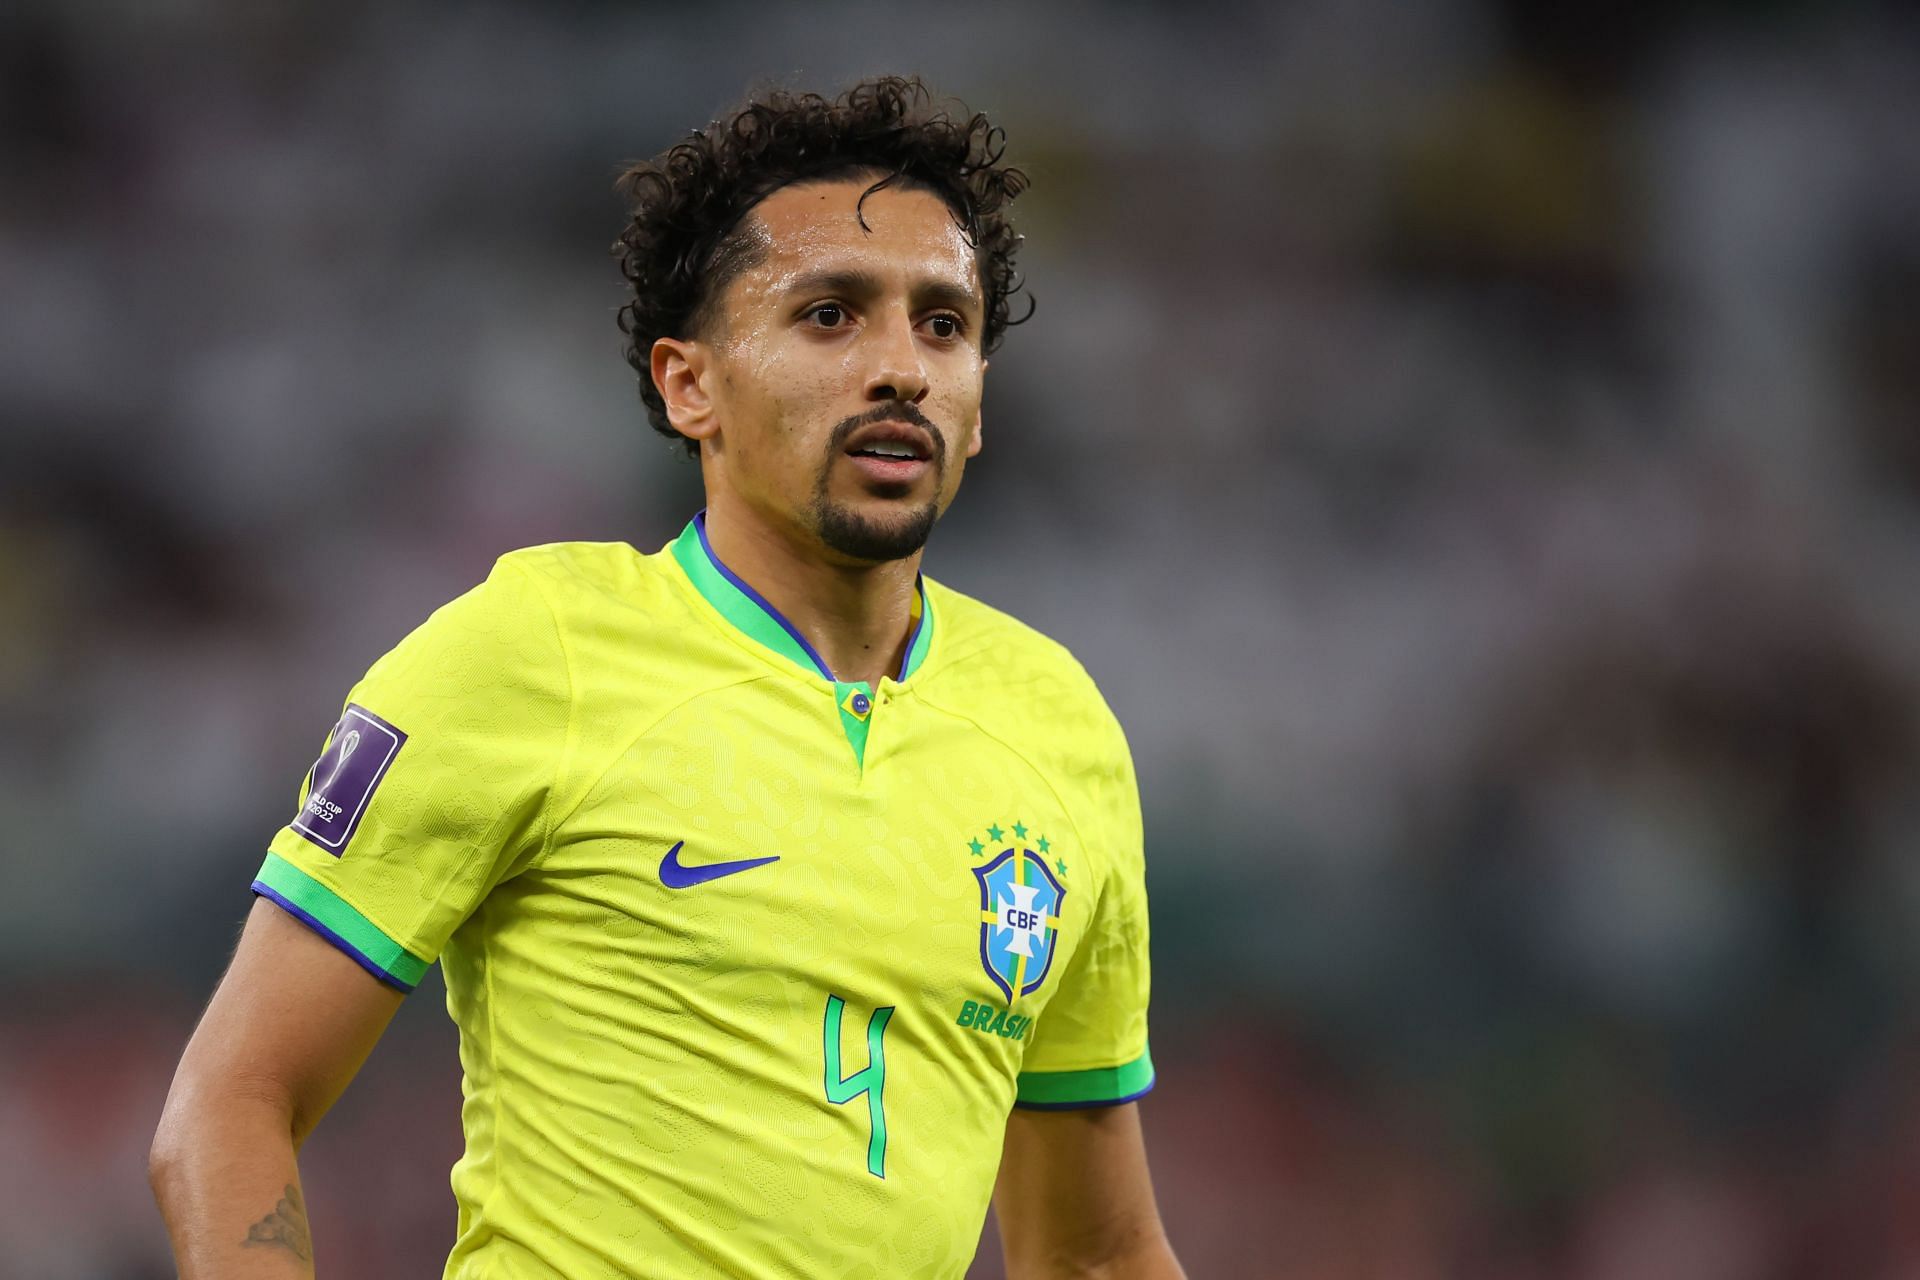 Marquinhos spoke about the need for improvements after the defeat.